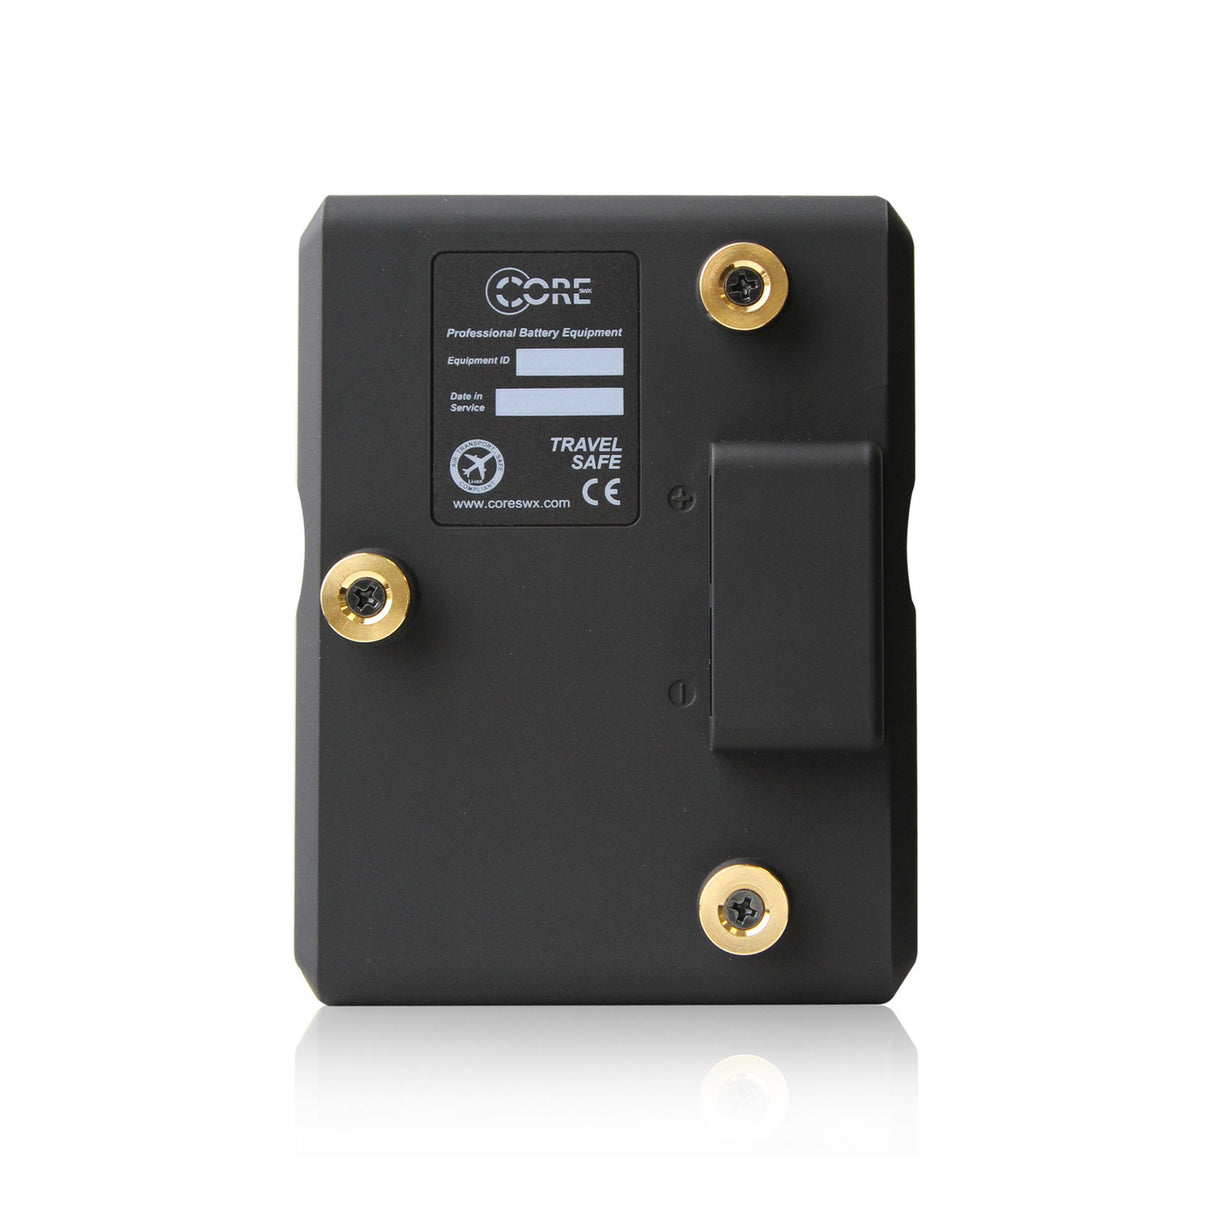 Core SWX NEO-9AG 98Wh Hypercore NEO Mini Gold Mount Lithium-Ion Battery Pack